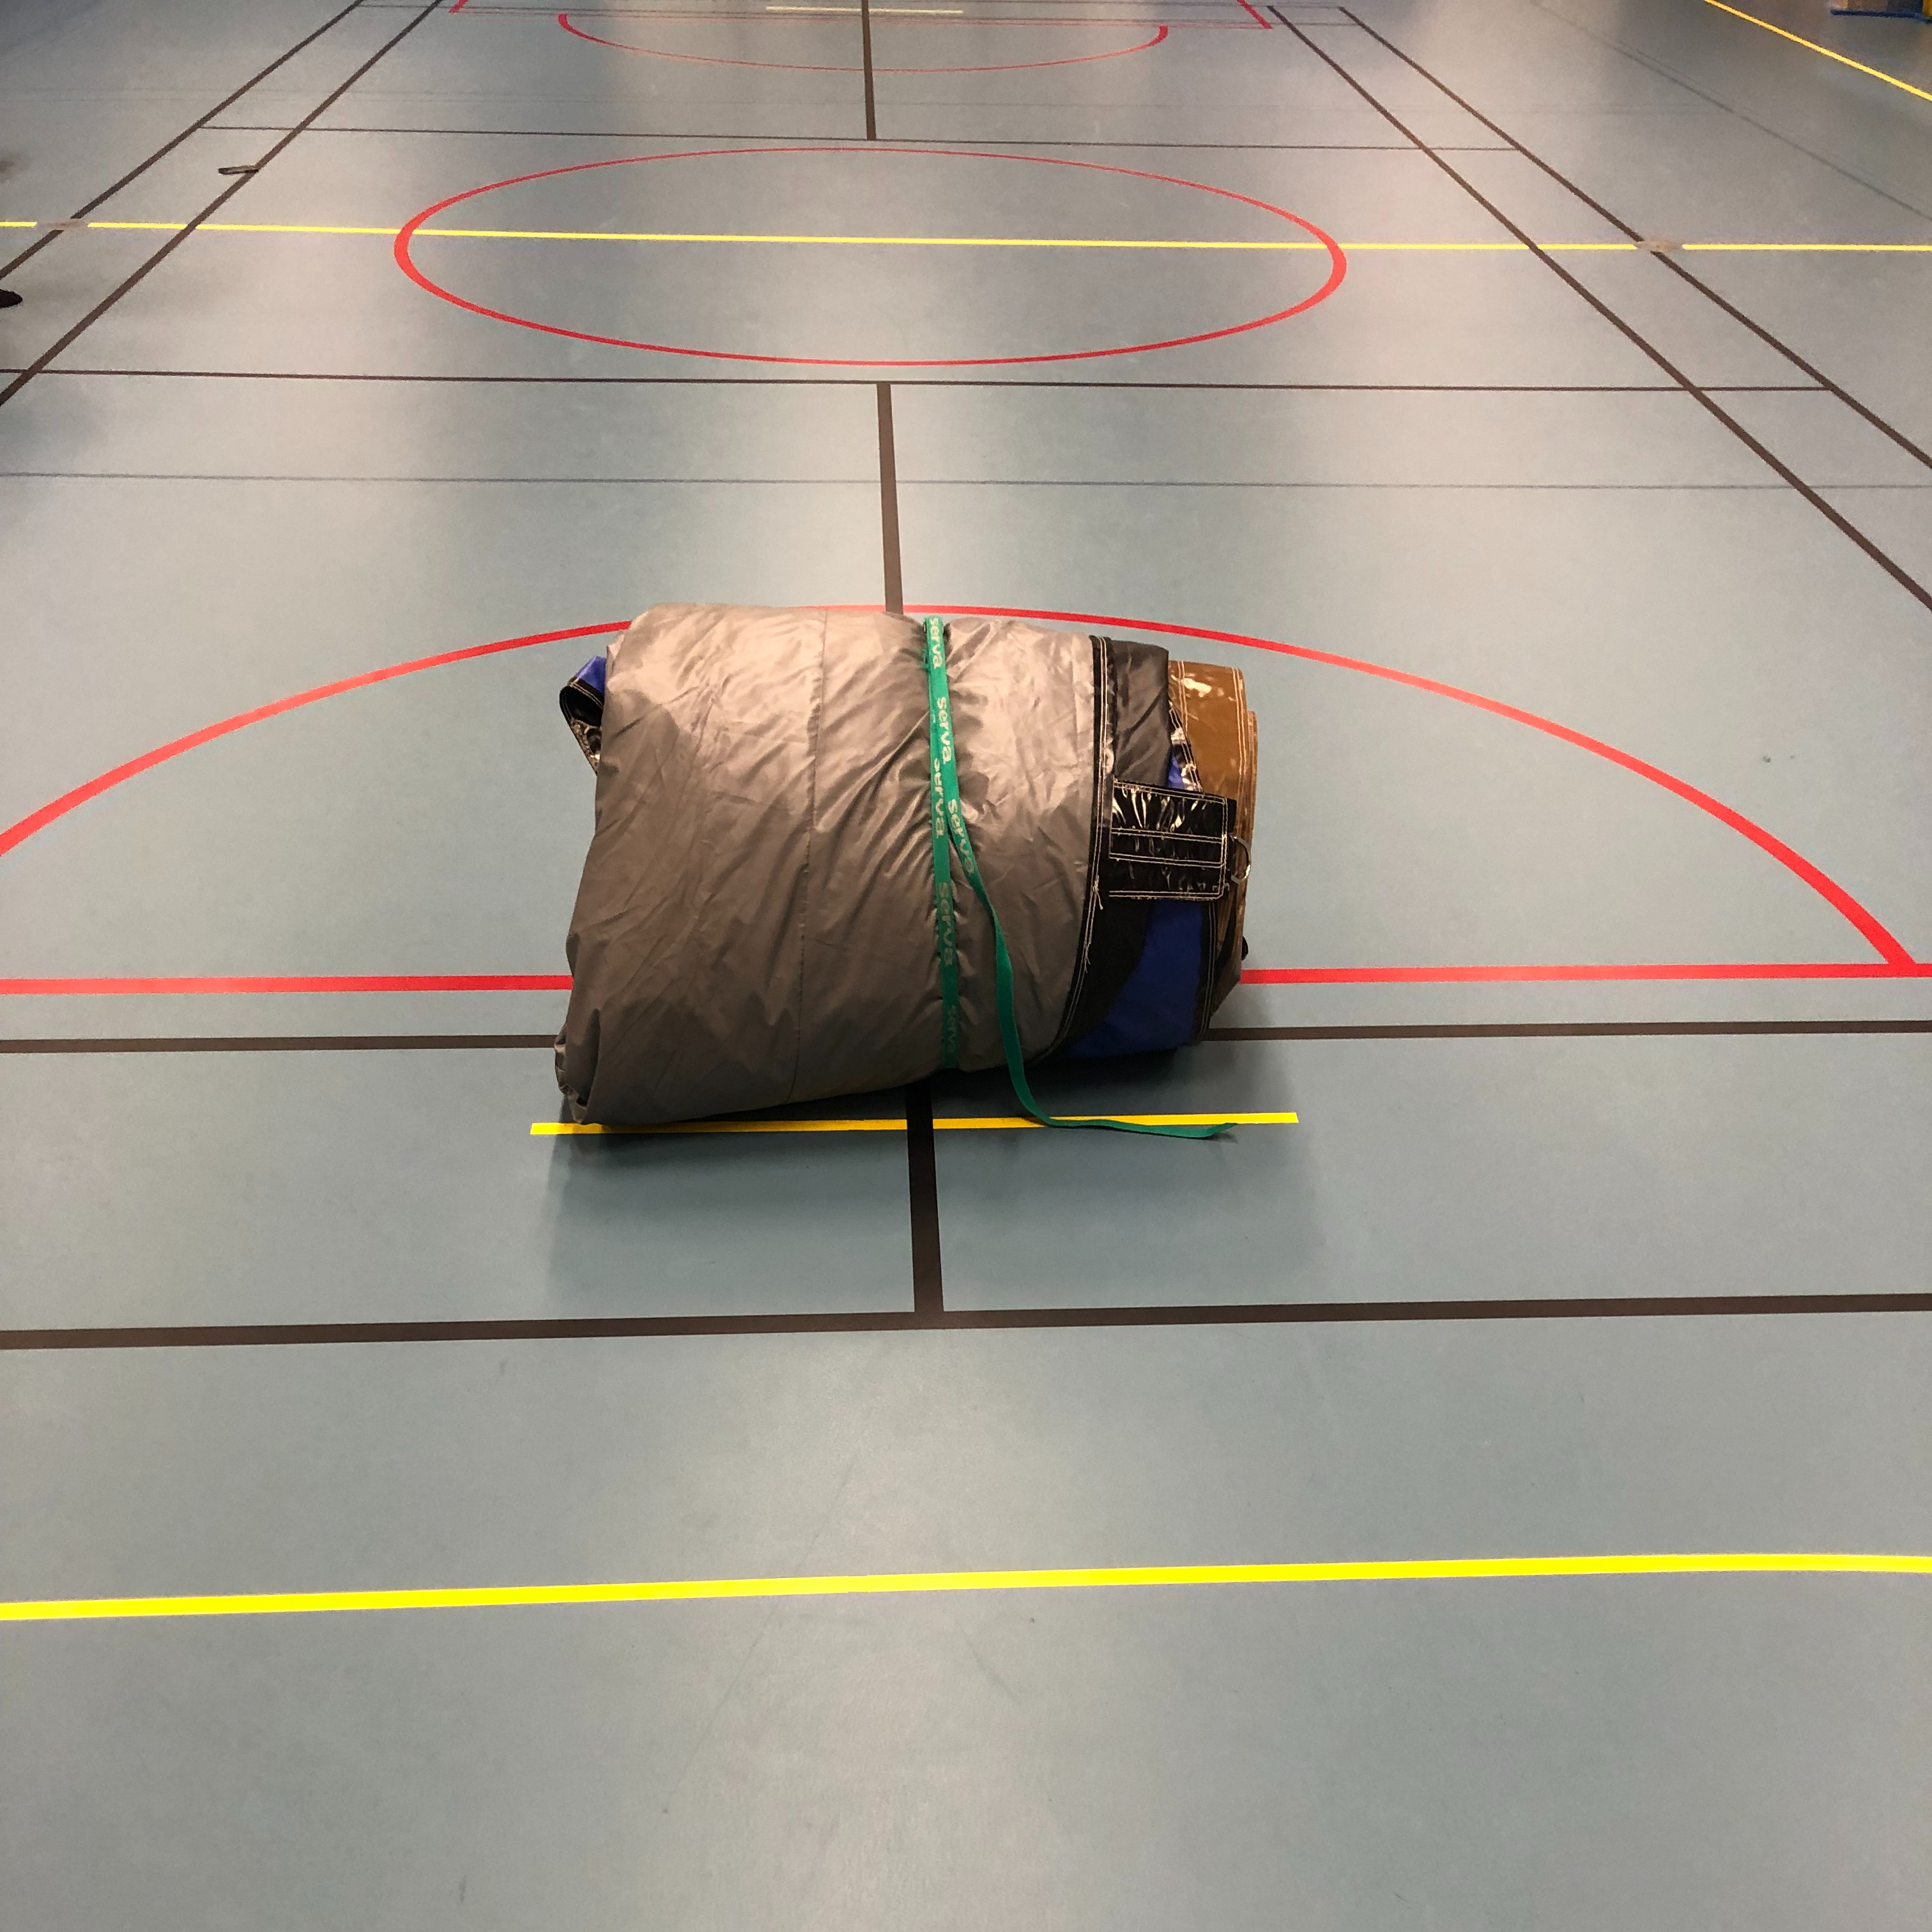 Gymnastics airbag from Mid-Air rolled up